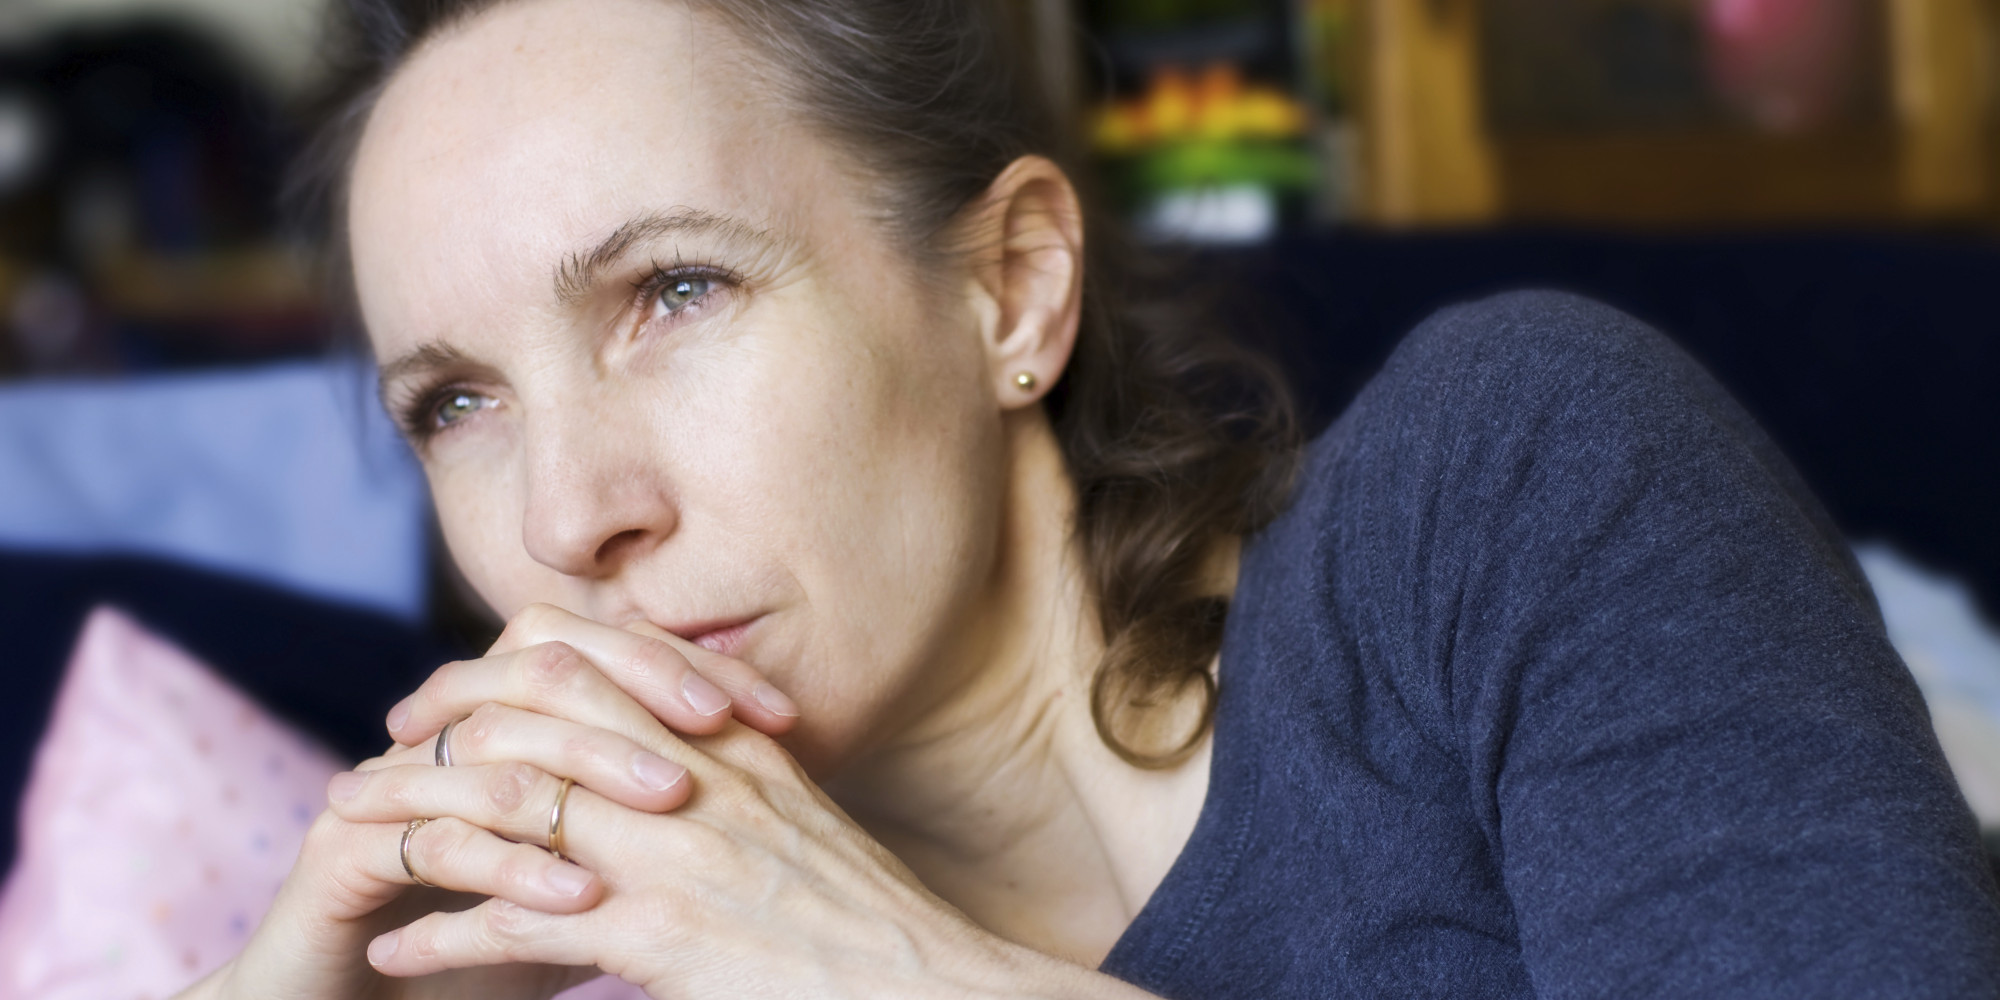 7 Signs You Might Be Facing A Midlife Crisis